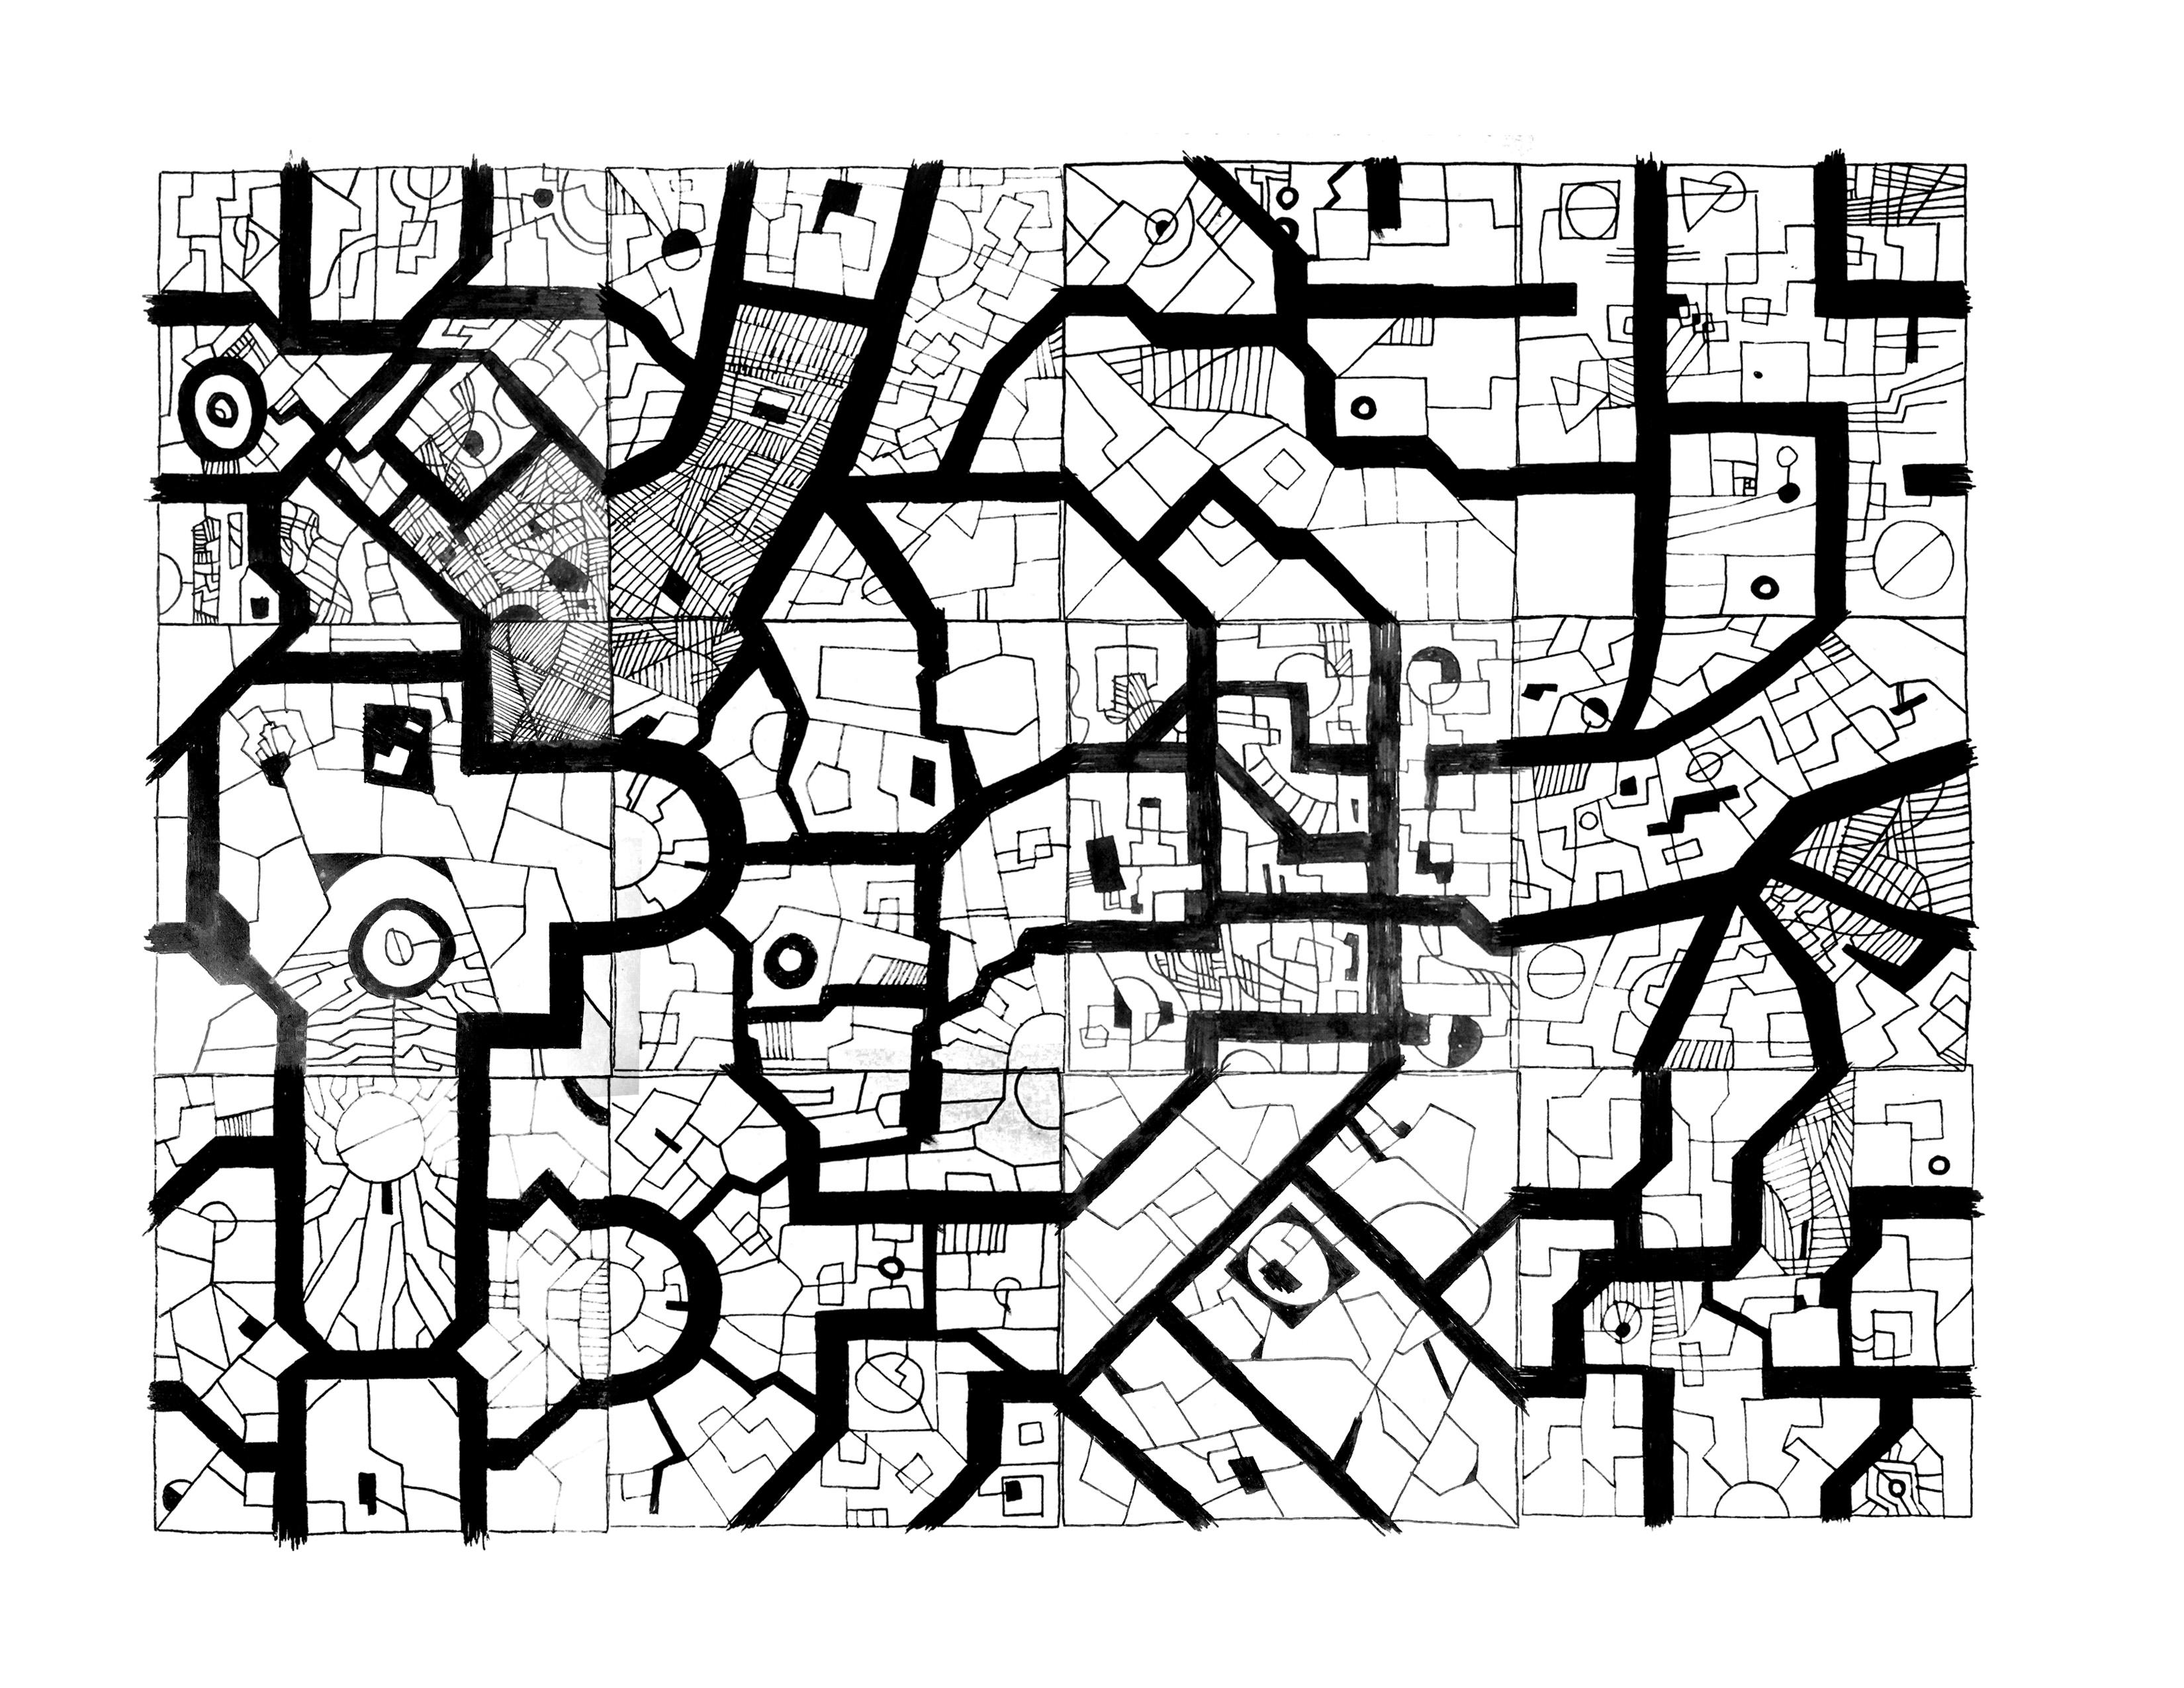 An Urban Geomorph for Nullhack. Just slice this badboy up, twist and turn it and duplicate it until you have a city of big enough size for your game.